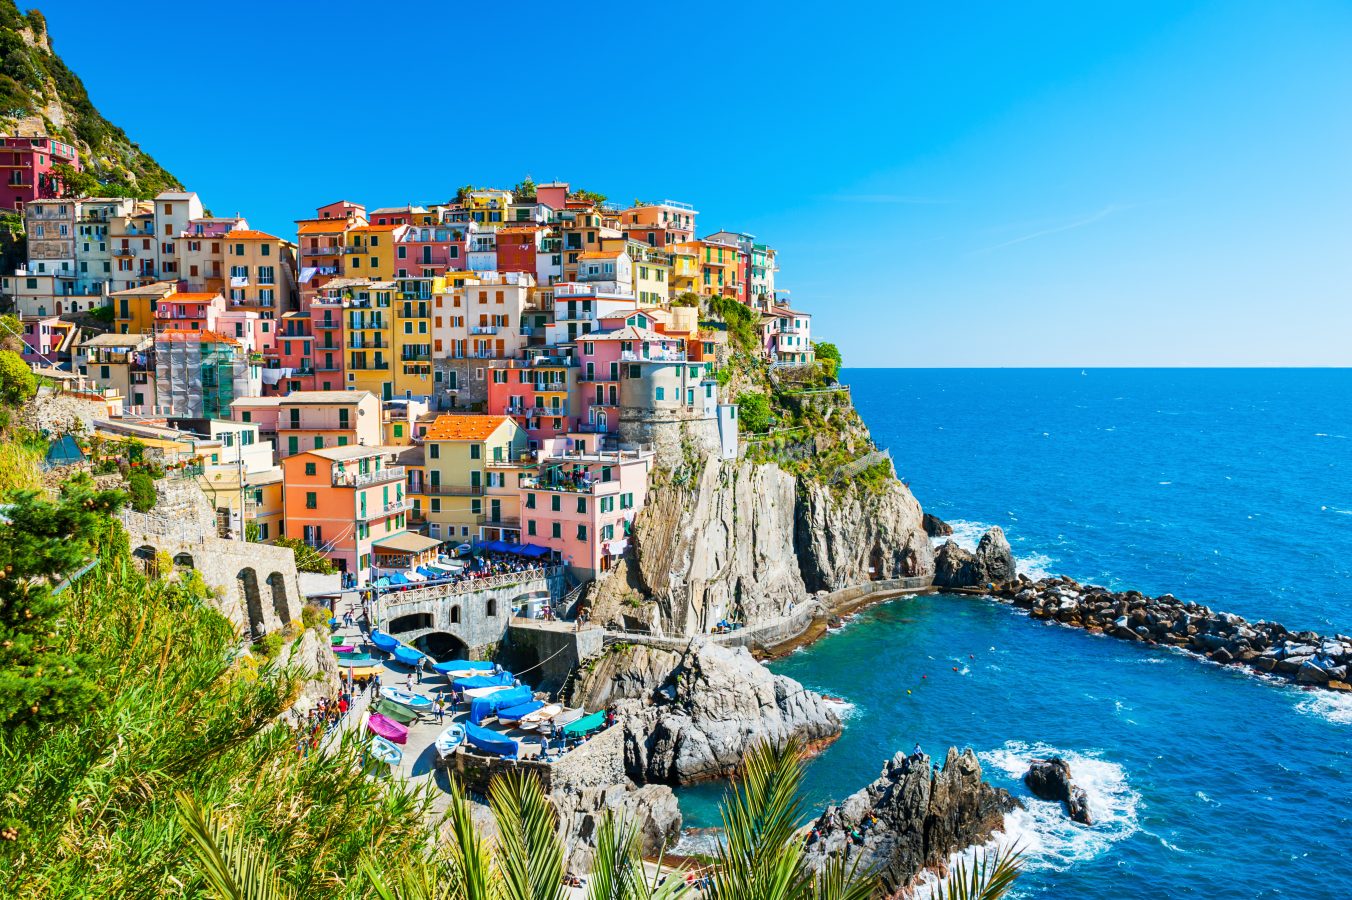 View of Manarola town, Cinque Terre National Park in Liguria, Italy - see more instagram captions for summer that you can use on your summer travel content